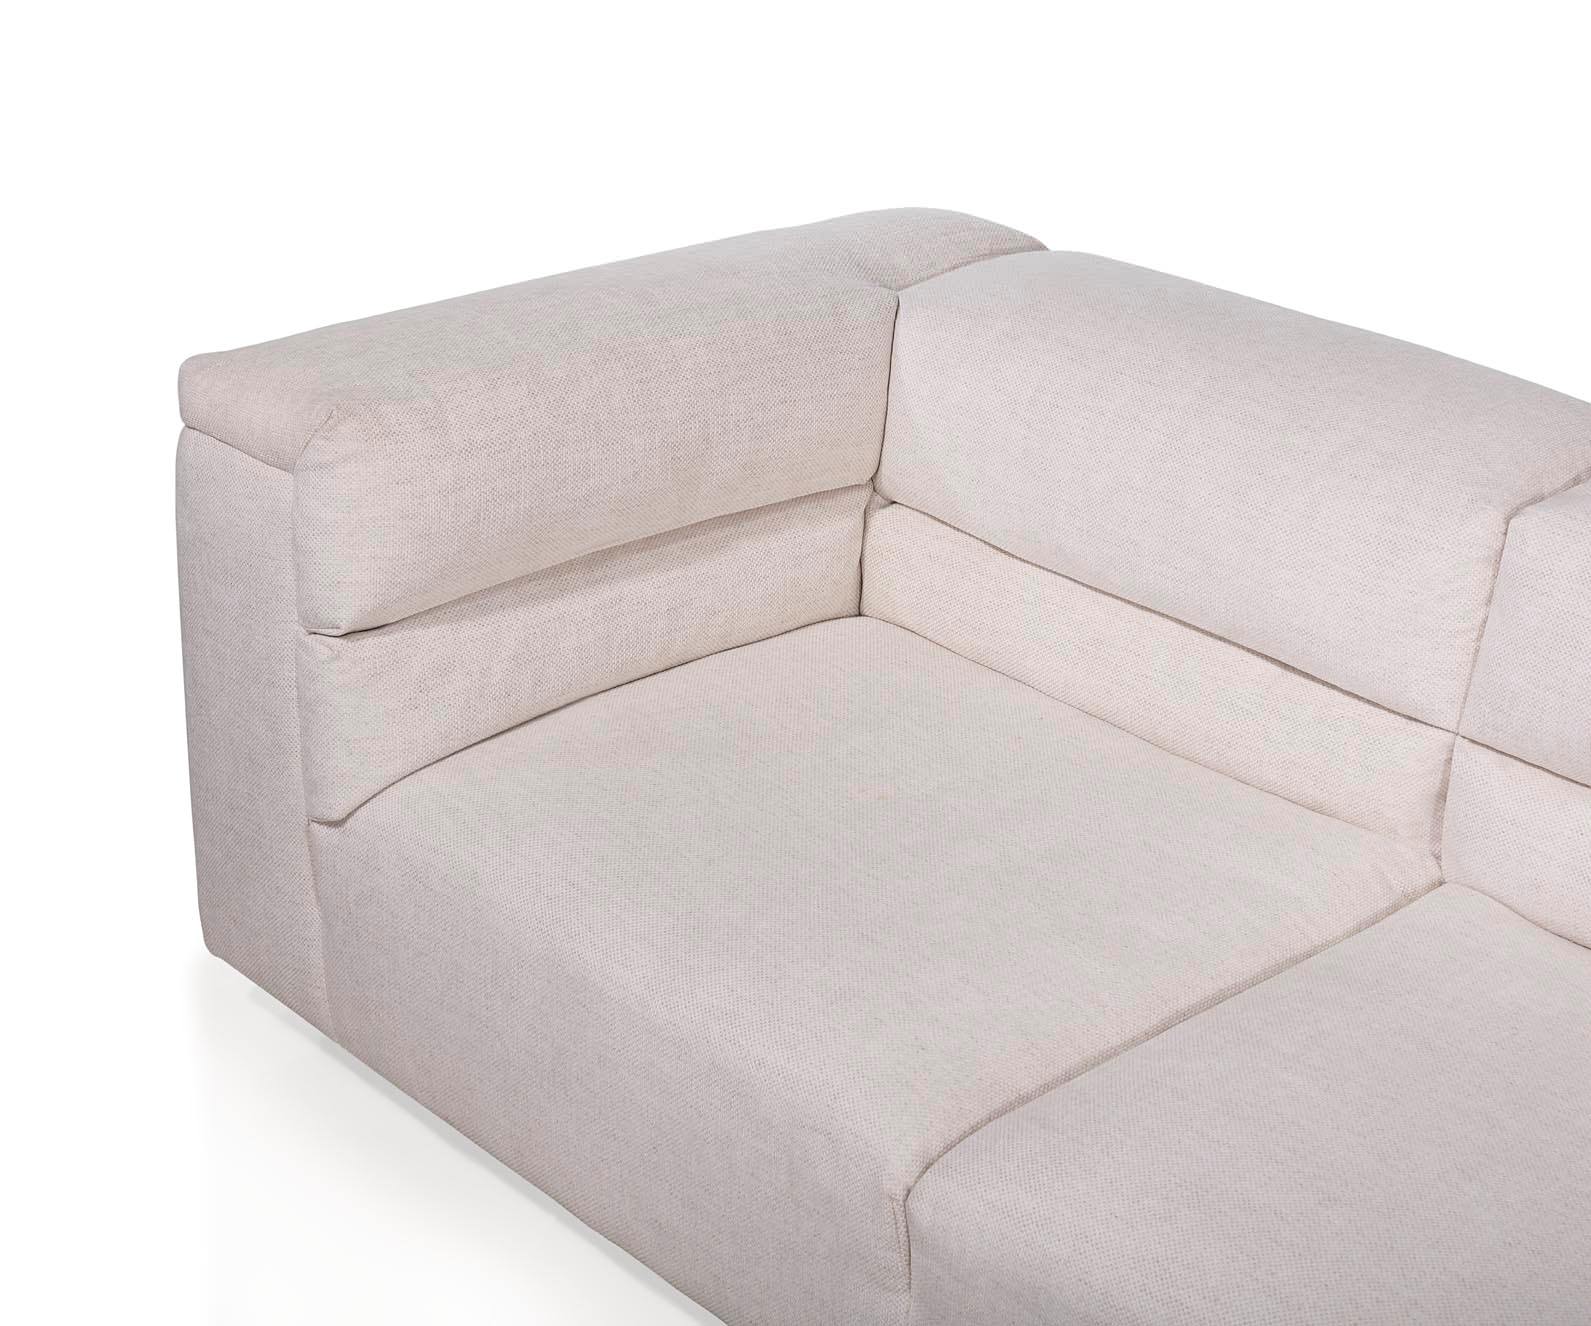 Cypress sumptuous oversized cushioning sits lightly on its wood feet. Made to order fully upholstered and available in a range of fabric options. Bespoke furniture options (...)